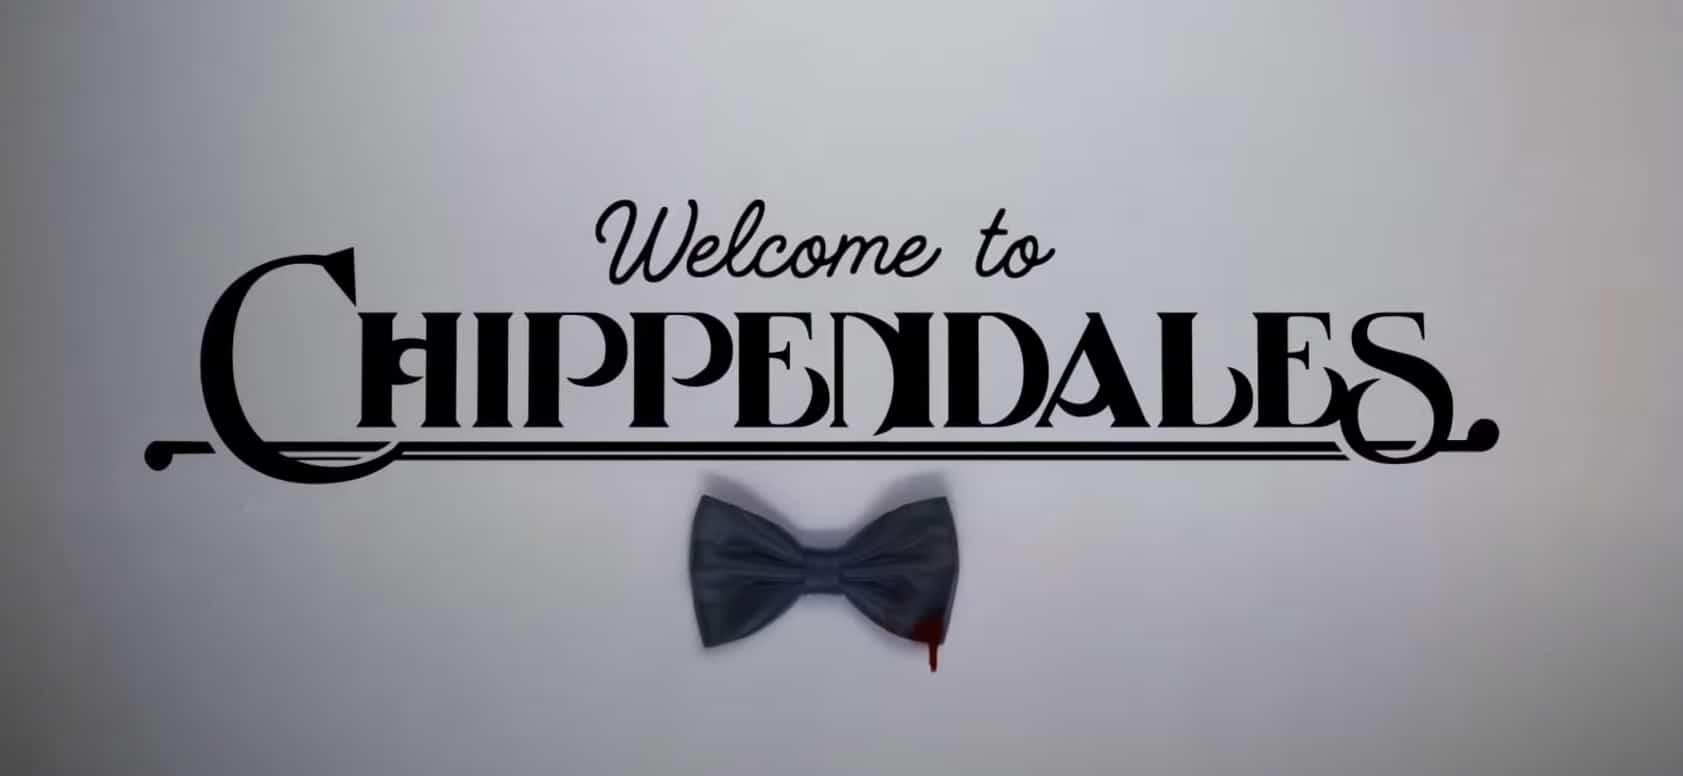 welcome-chippendales-disney